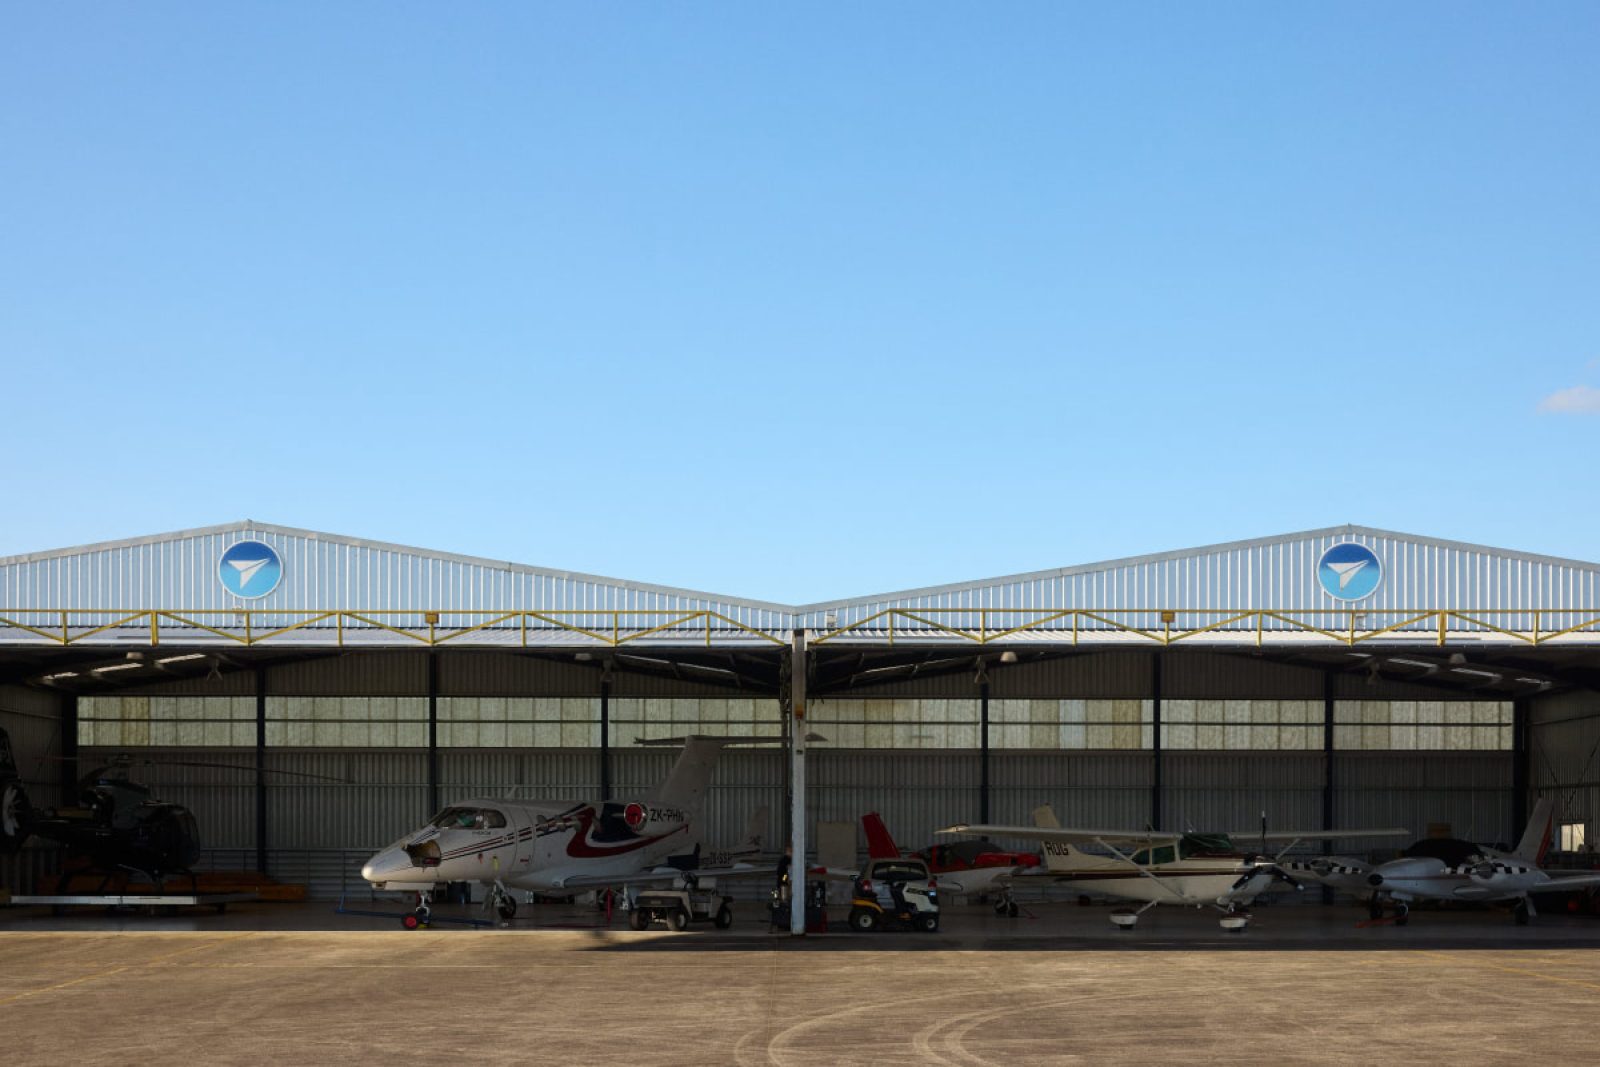 Hangars with planes inside on a clear sunny day